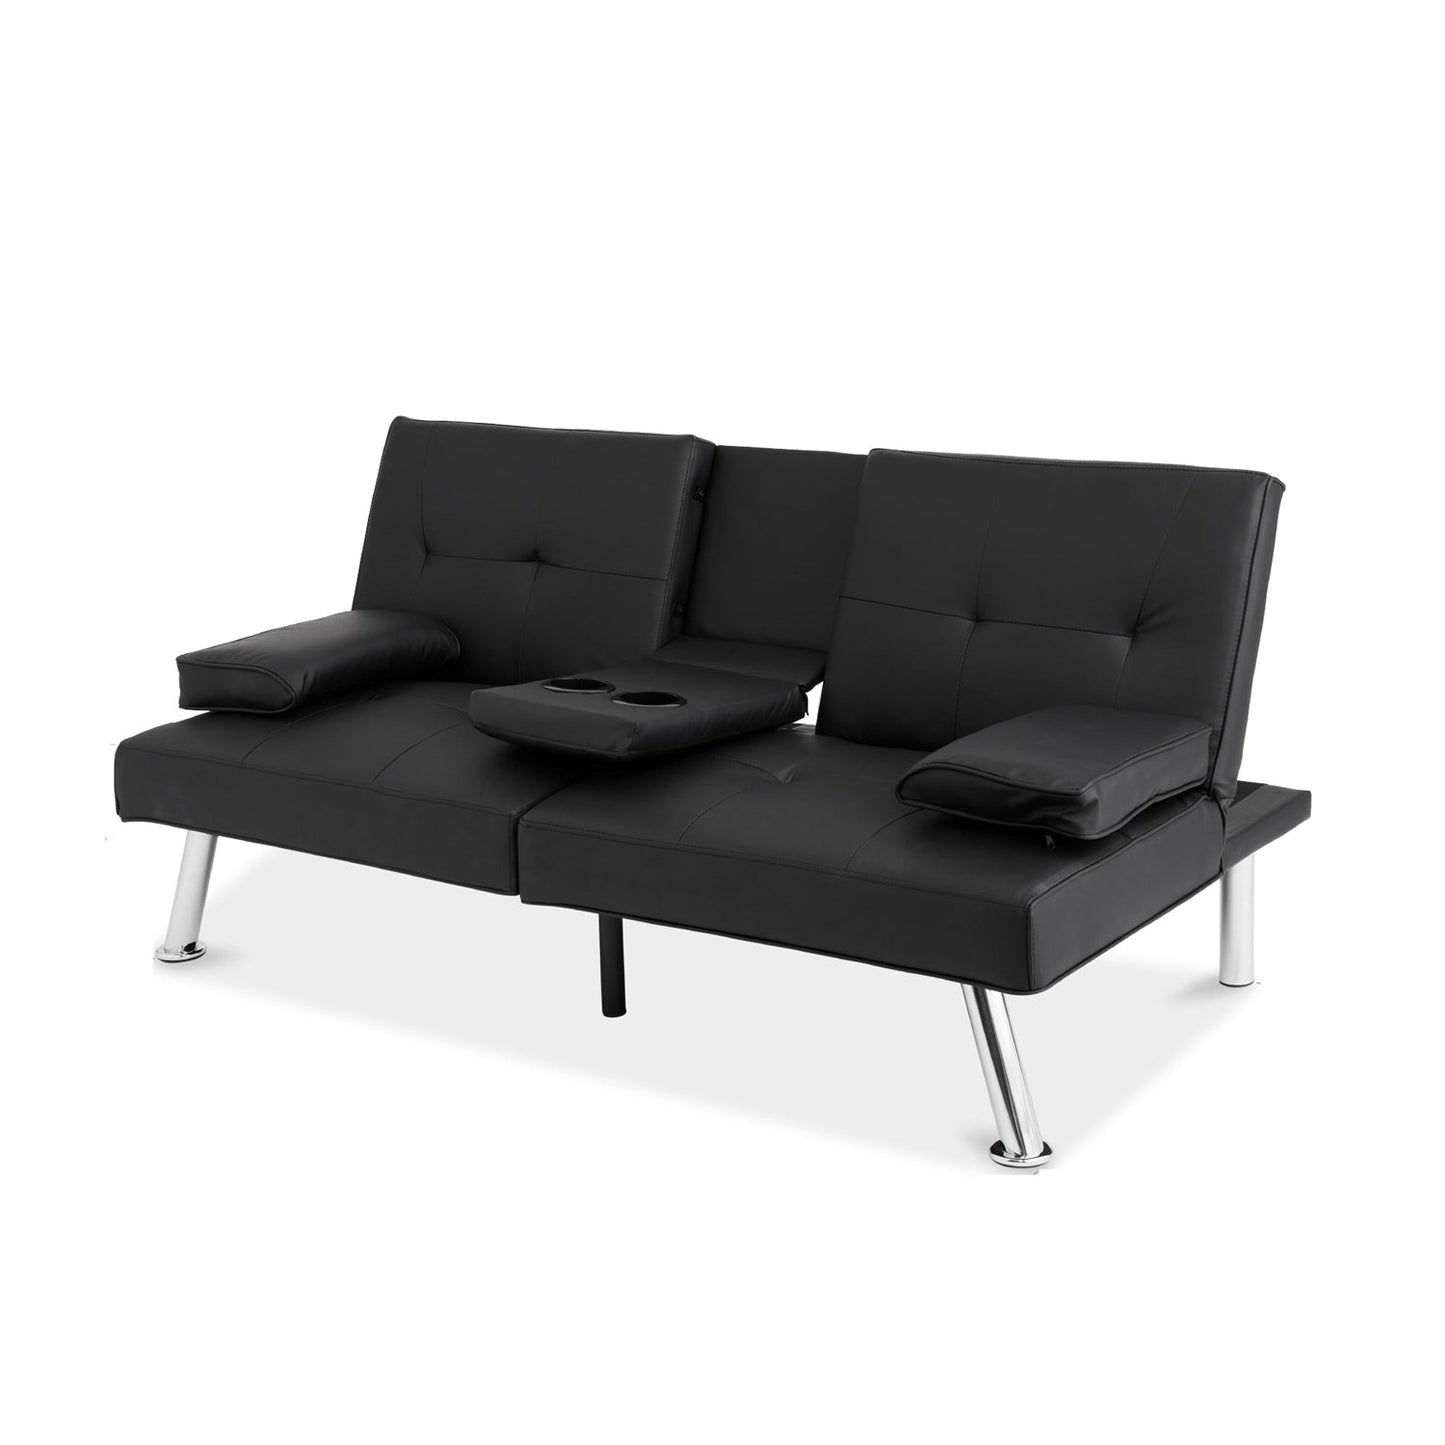 Living Room > Sofas - Black Faux Leather Convertible Sofa Futon With 2 Cup Holders